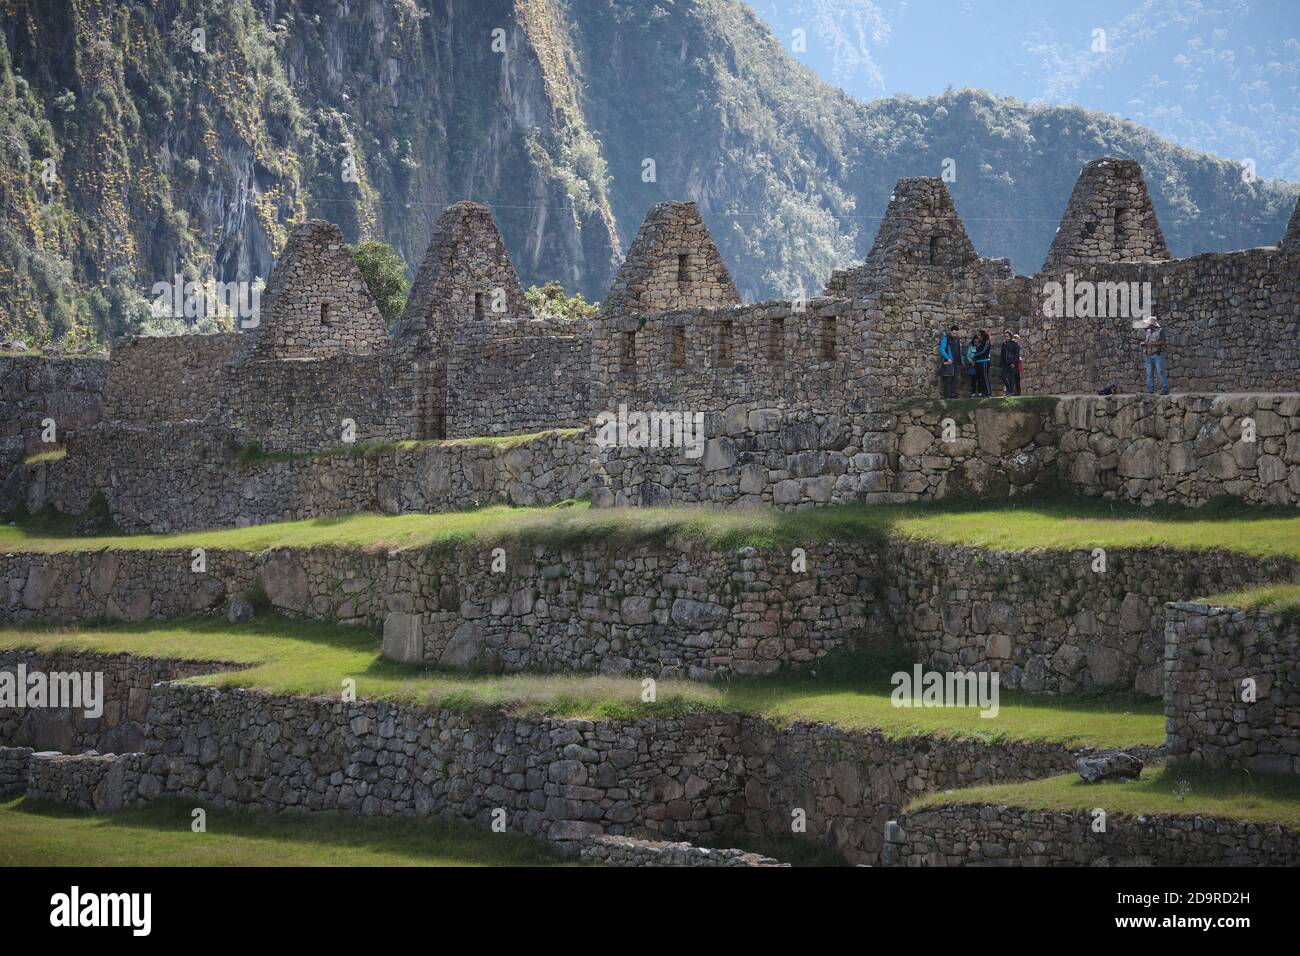 Tourist group and guide on tiered terraces at Machu Picchu, Peru Stock Photo